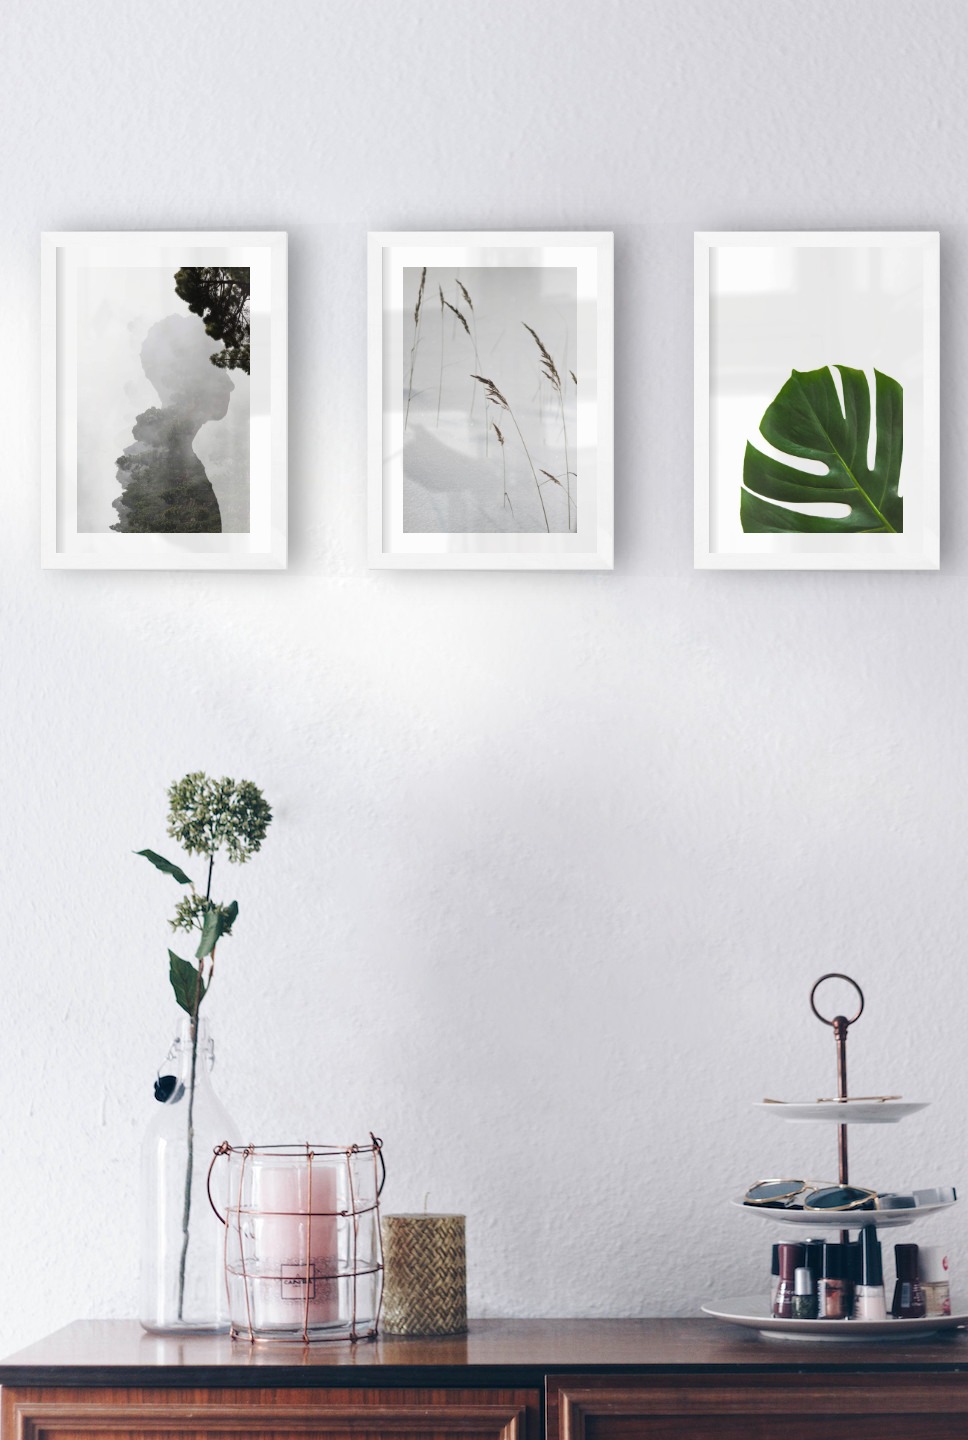 Gallery wall with picture frames in white in sizes 21x30 with prints "Silhouette and tree", "Sharp in the snow" and "Plant"